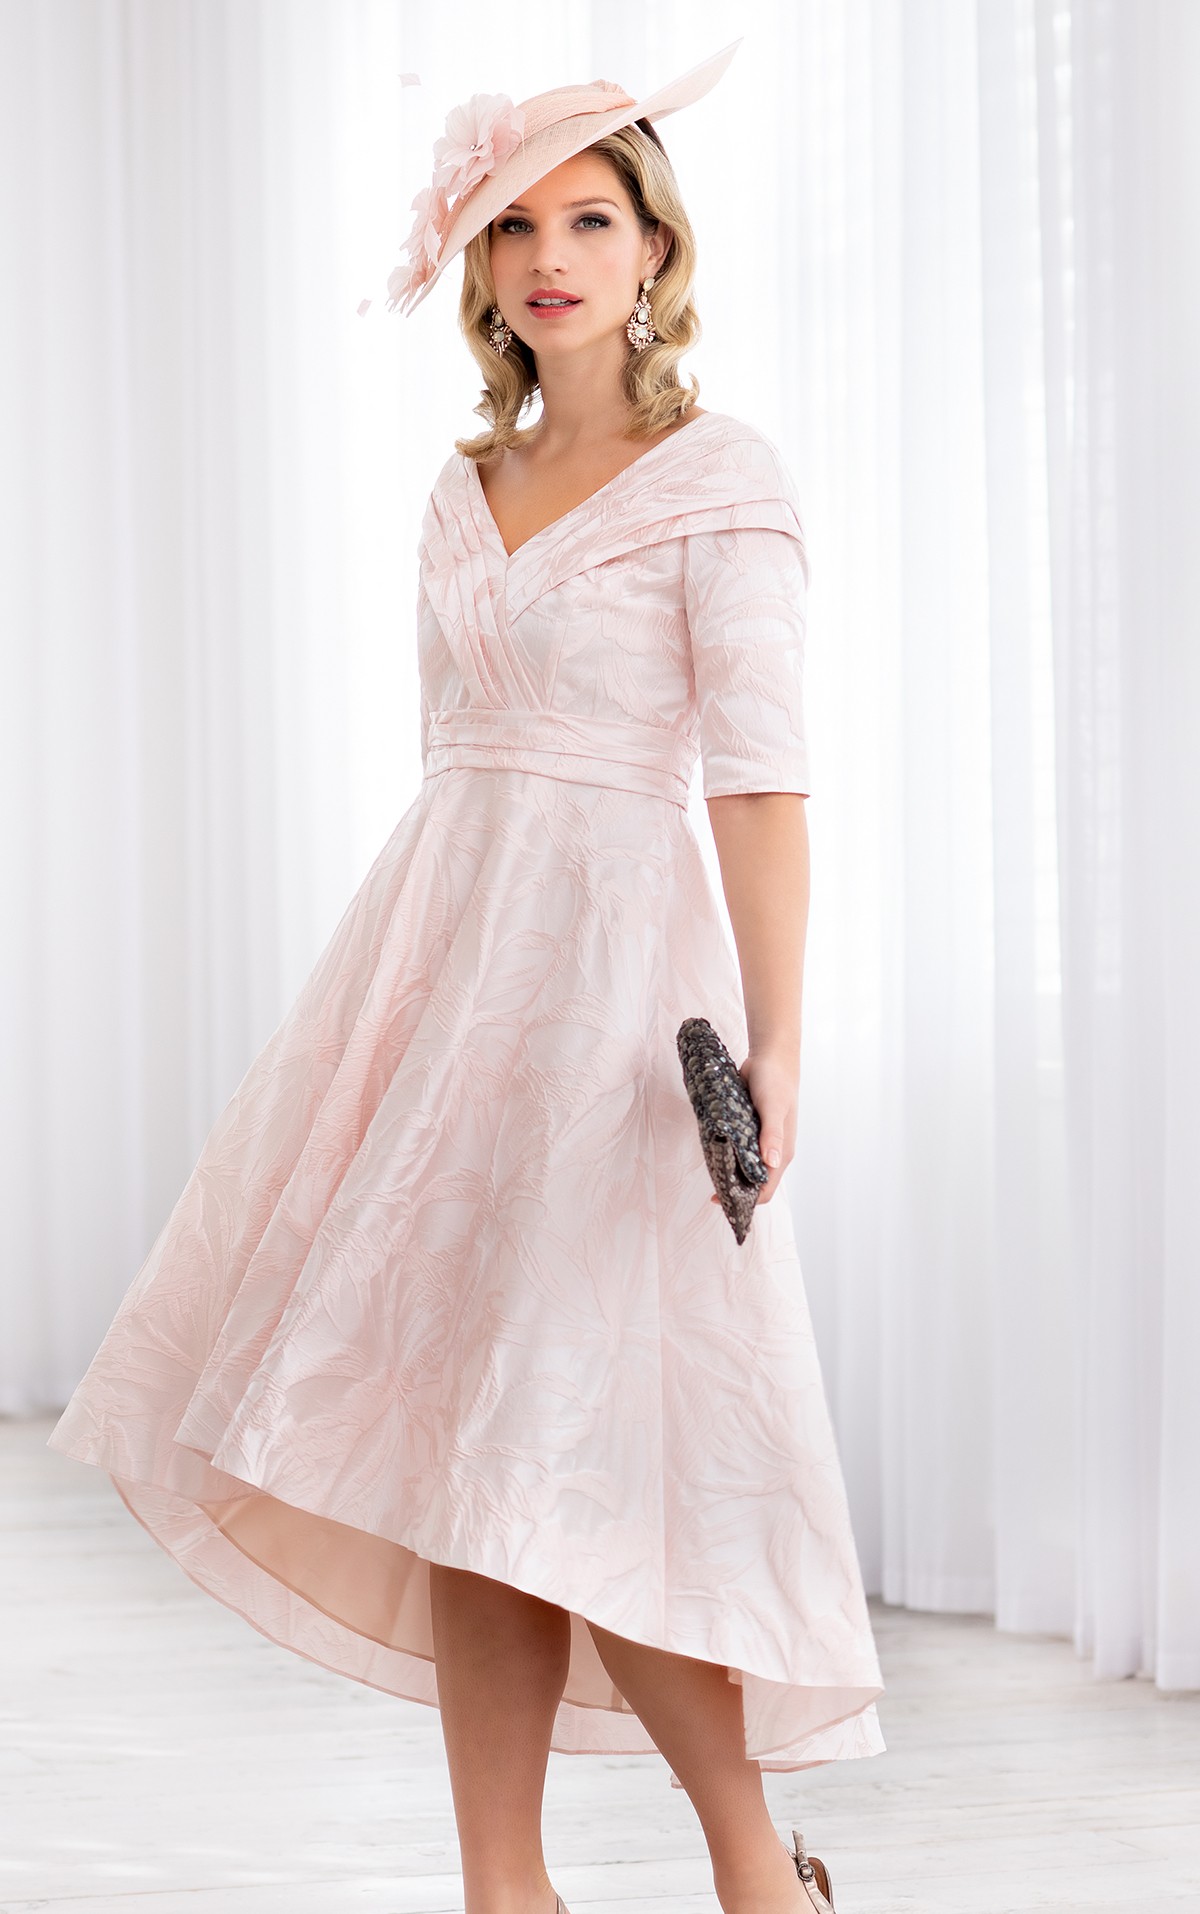 Ispirato ISH808 - Size 14 - Ispirato ISH808  Pale Pearl Pink Aline dress  with fitted pleated bodice with V  neckline  & 3/4 length sleeves  - Brighton's leading stockist for Mother of the Bride, Mother of the Groom & lady guest outfits - Occasions at Blessings 1 Loyal Parade, Mill rIse, Westdene,  Brighton. East Sussex BN1 5GG T: 01273 505766 E:occasions@blessingsbridal.co.uk